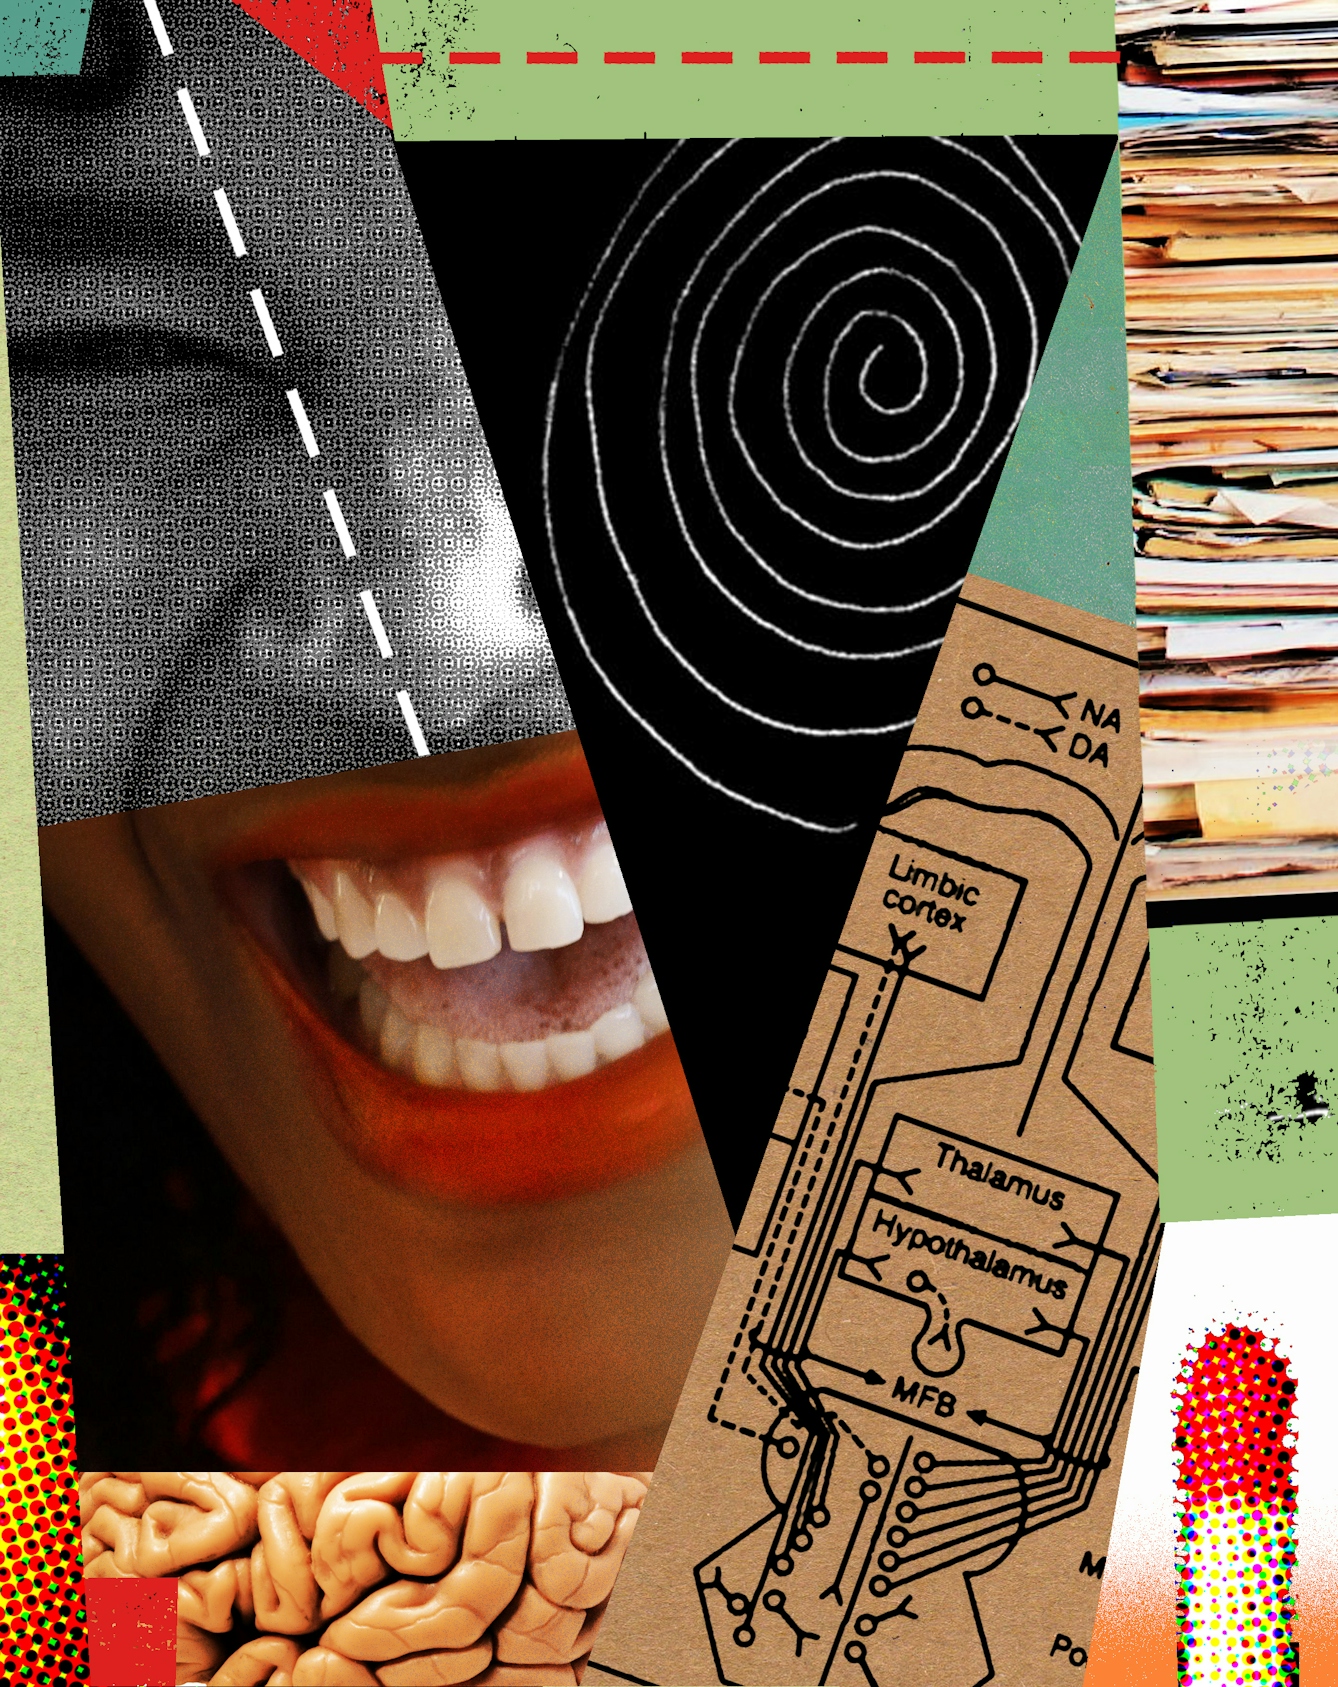 Detail from a larger digital montage artwork made up of archive illustrations, photographs and graphical shapes. The overall hues of the artwork are reds, greens and blacks. There are a number of references across the artwork including a laughing face, a match and a wiring diagram representing links within the human brain.